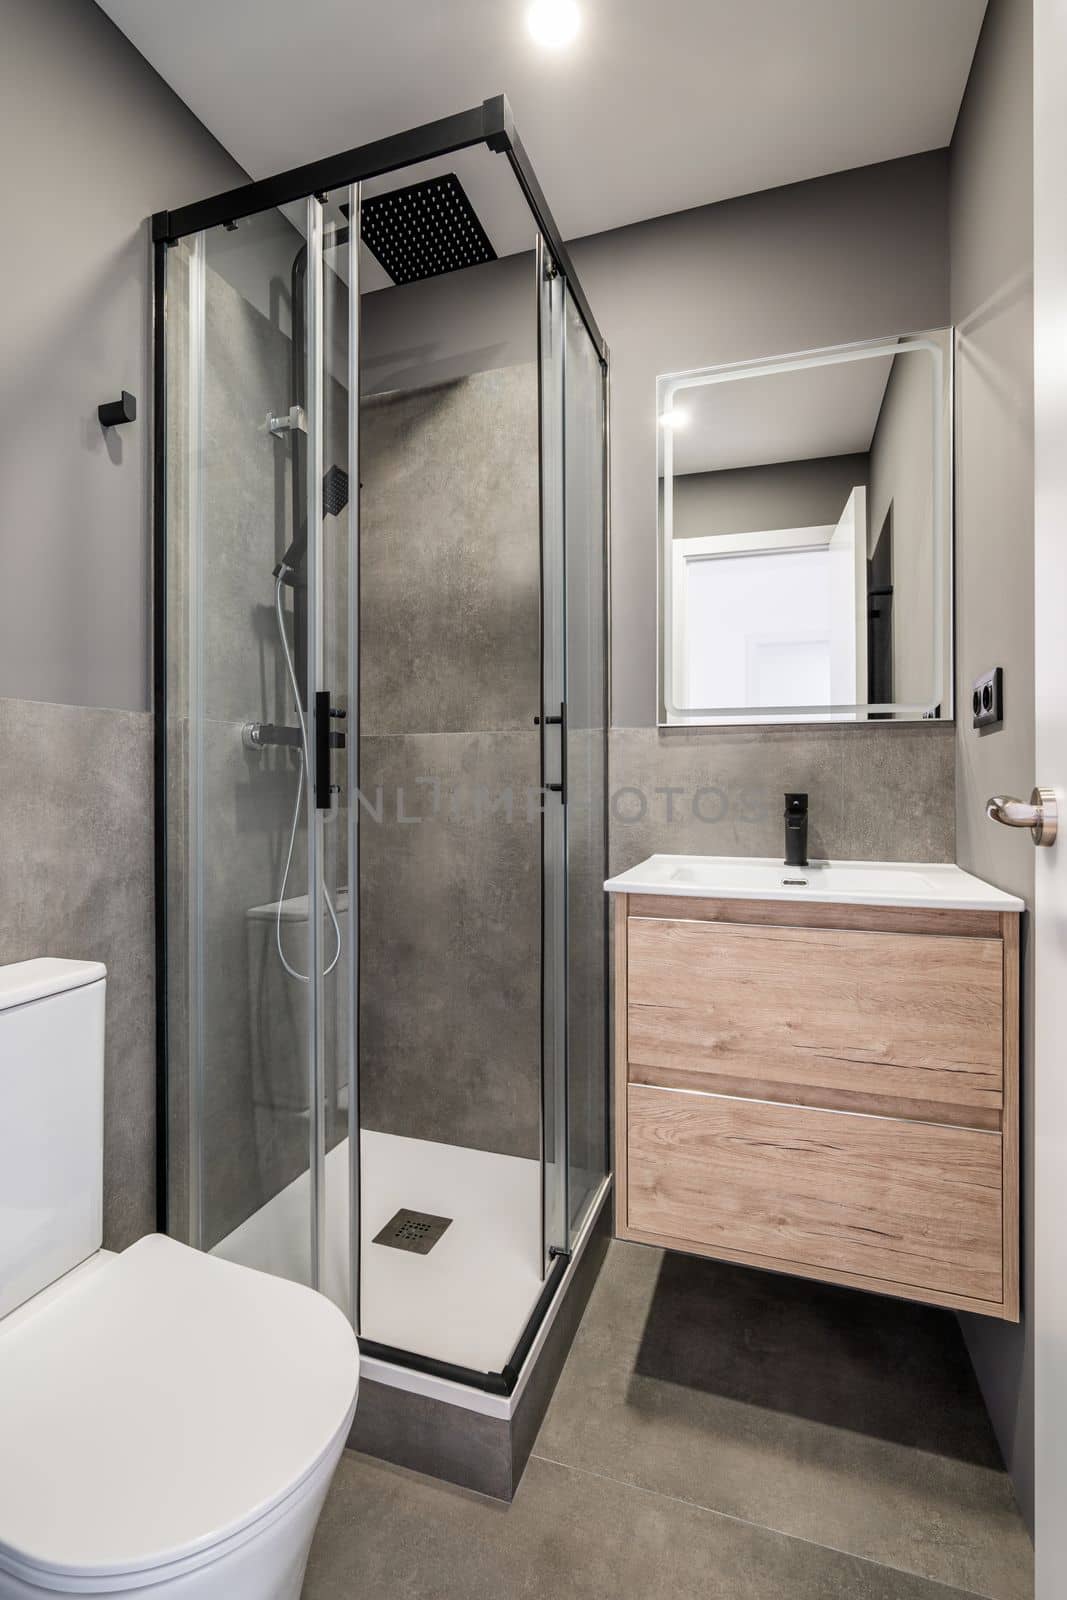 Small bathroom with bright lighting from white ceiling. In corner is shower with glass sliding doors. Toilet bowl and sink in white ceramic. On wall is designer mirror with reflection of front door